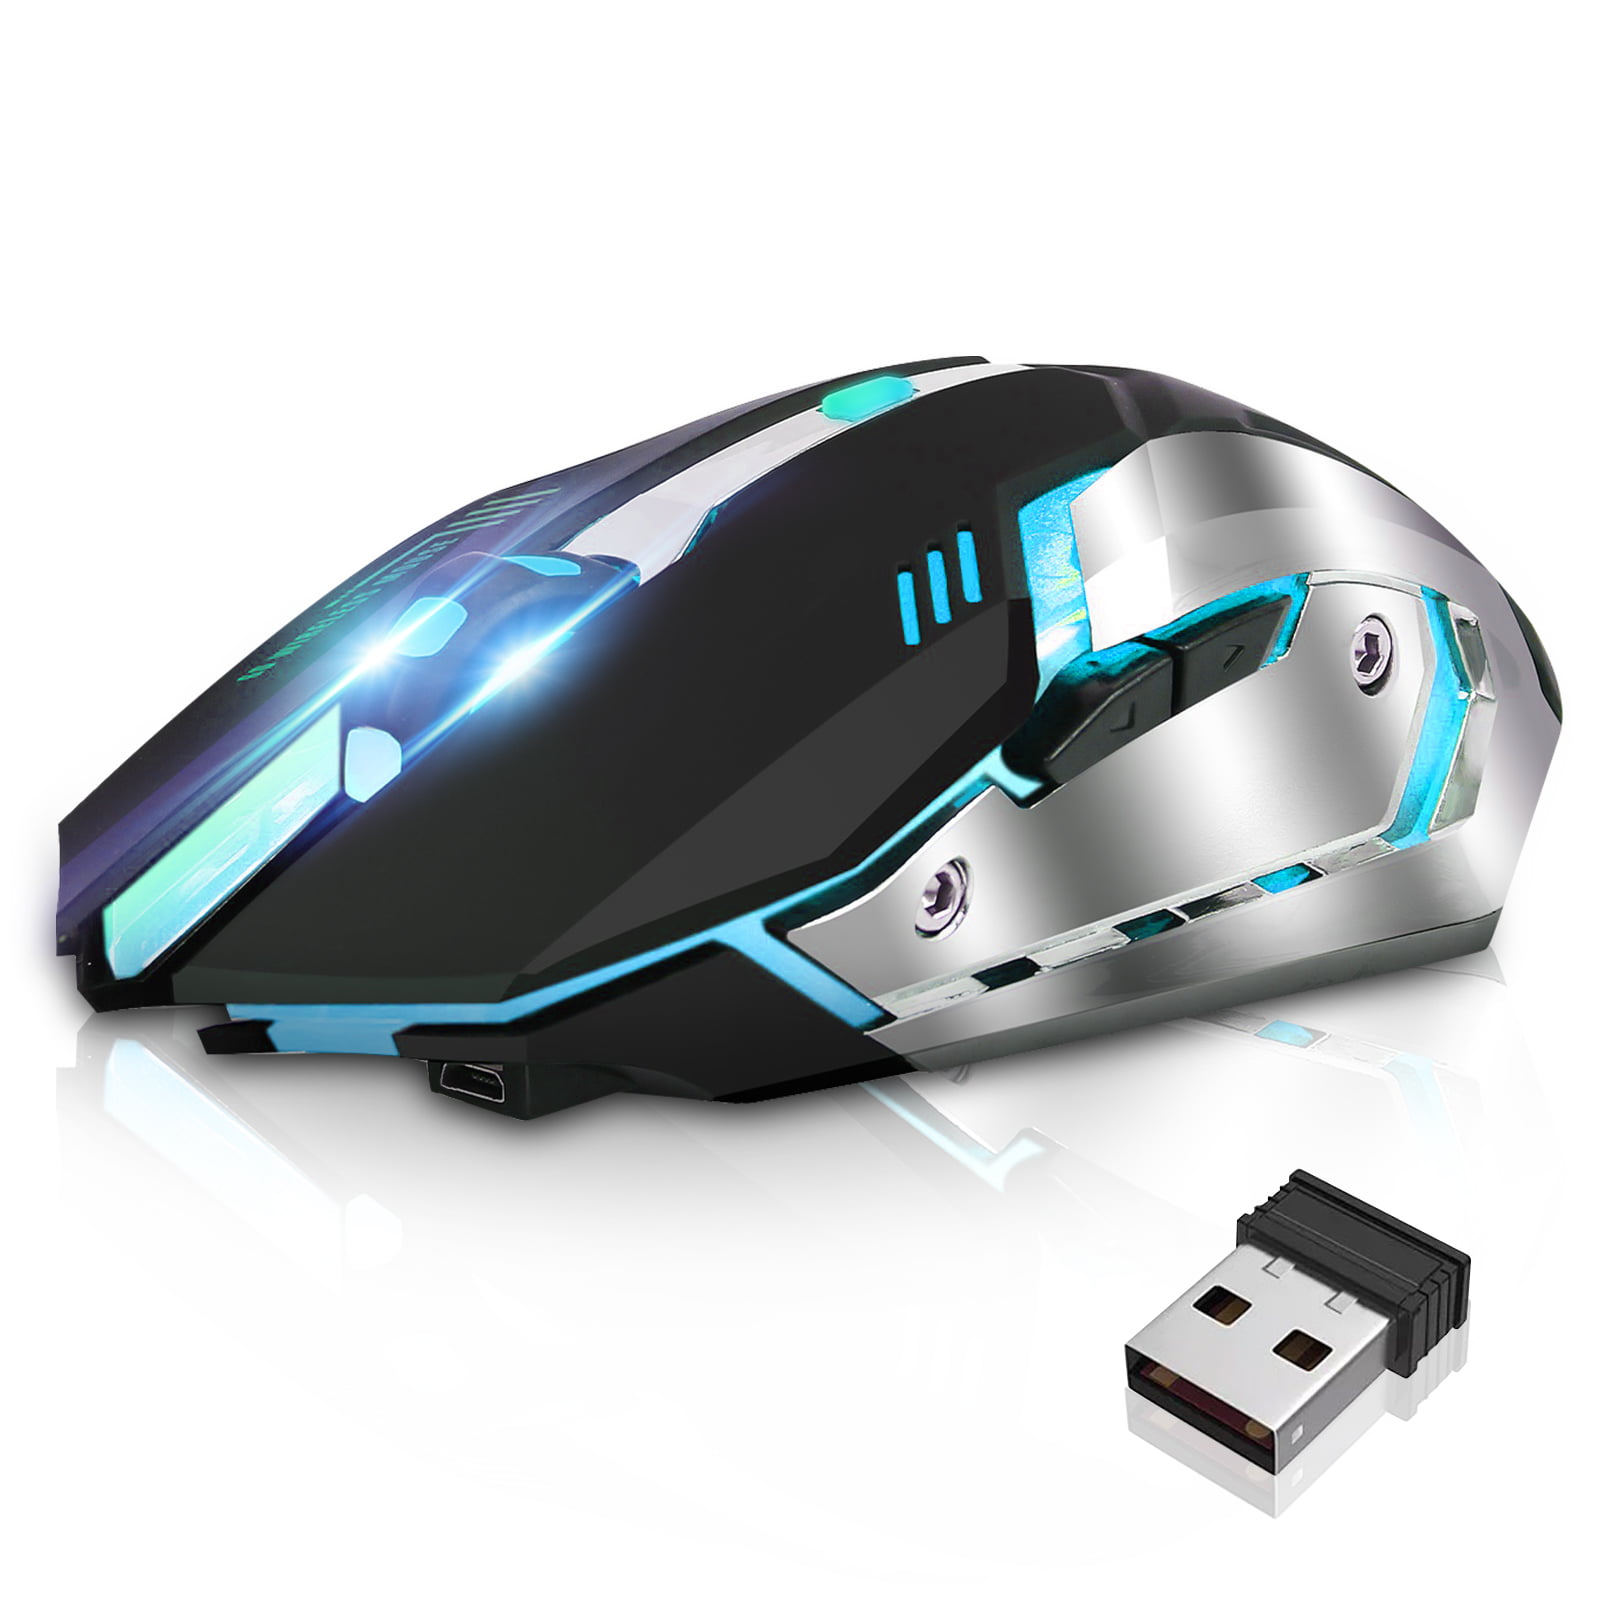 2.4GHz Wireless 2400DPI 6 Buttons USB Optical Gaming Mouse Mice for PC Laptop 